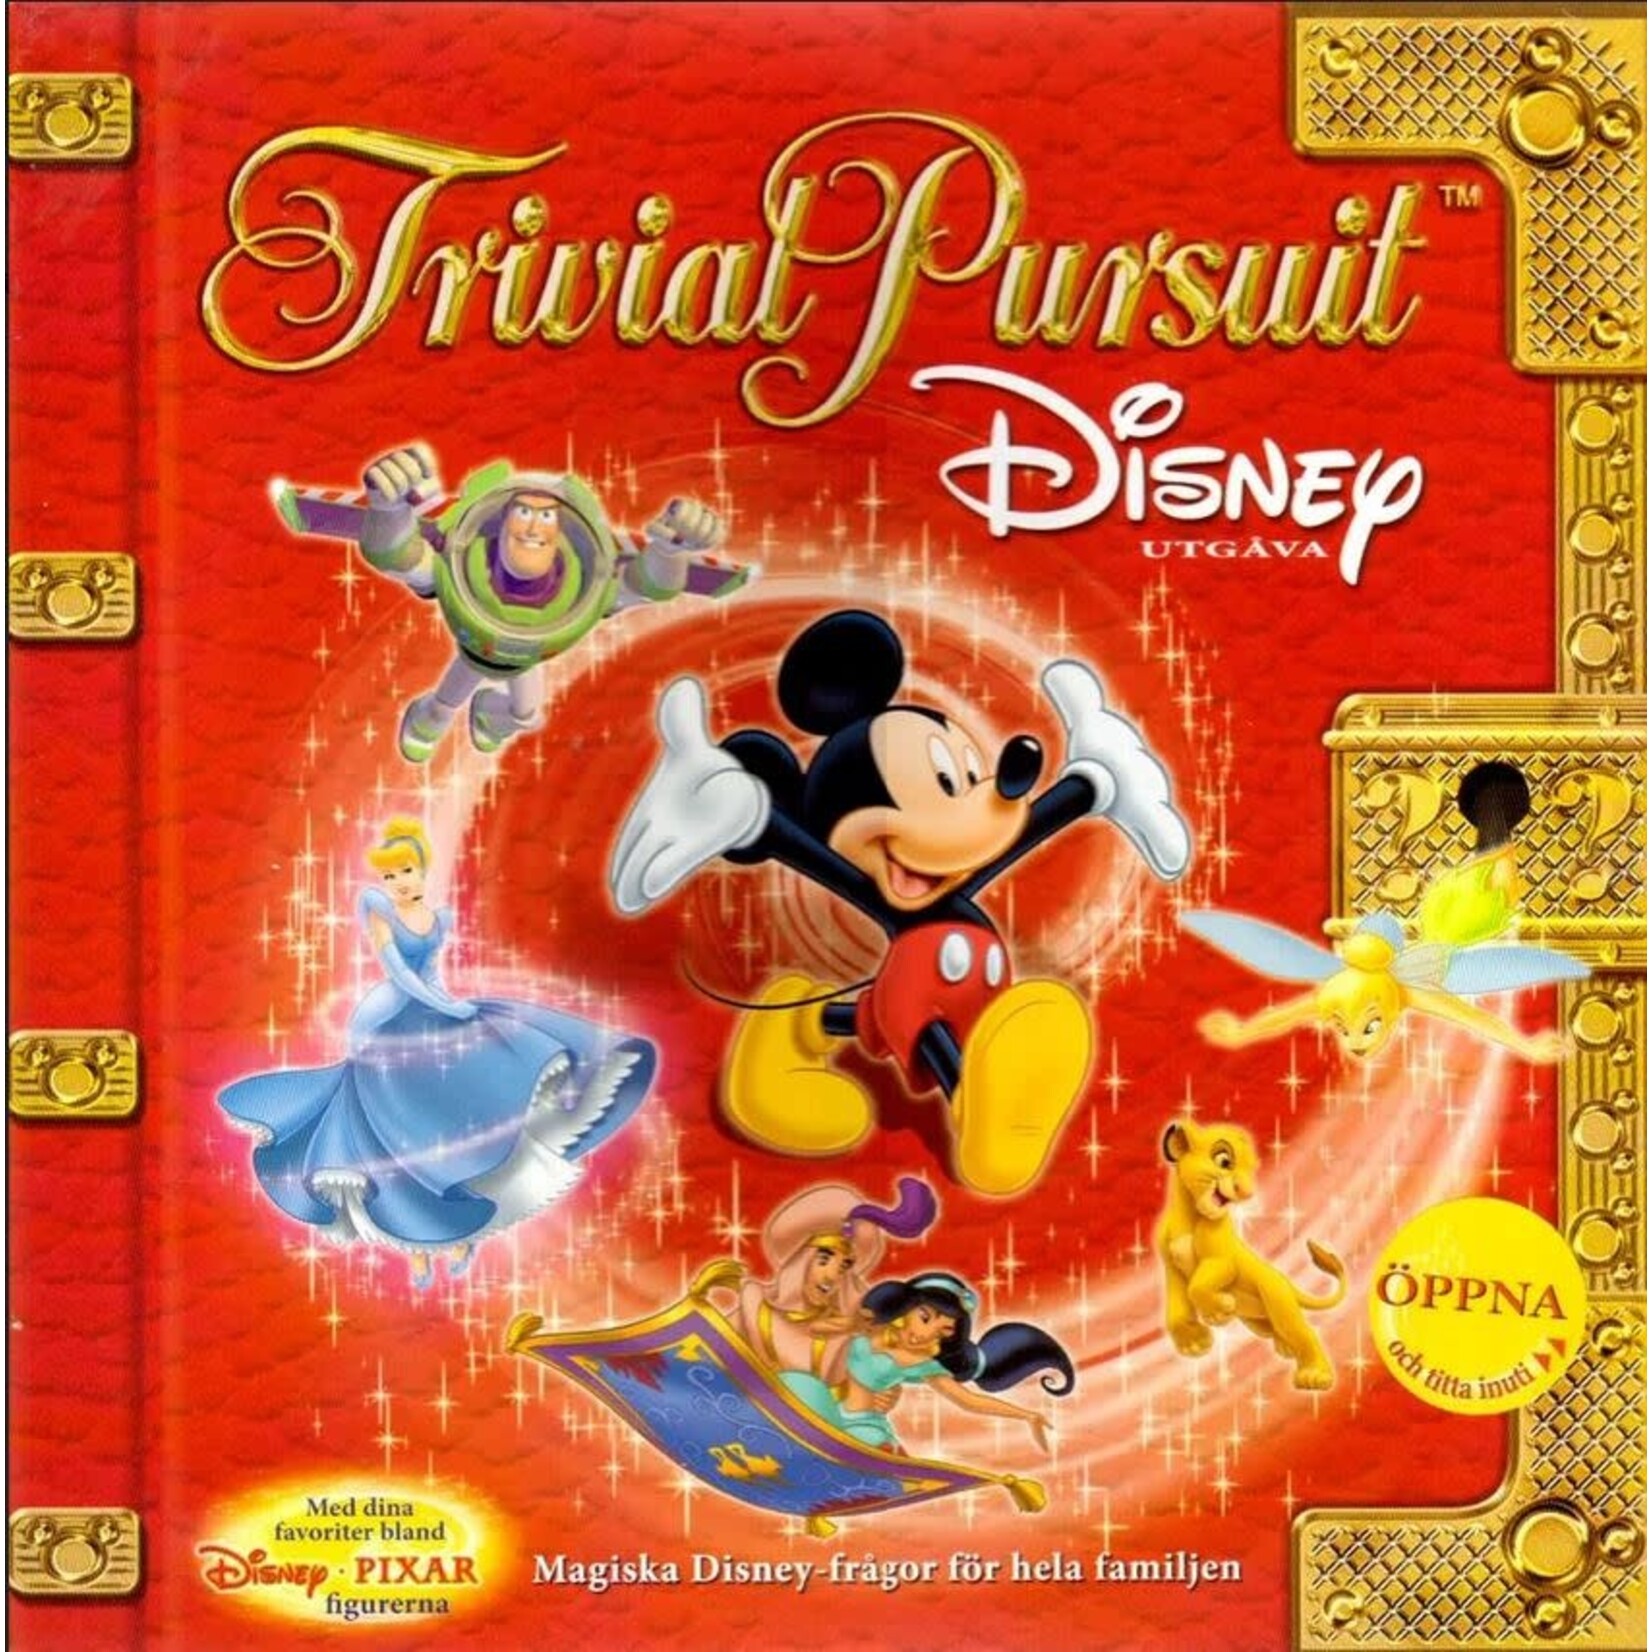 #18554 Trivial Pursuit Disney Edition: Dragon Cache Used Game